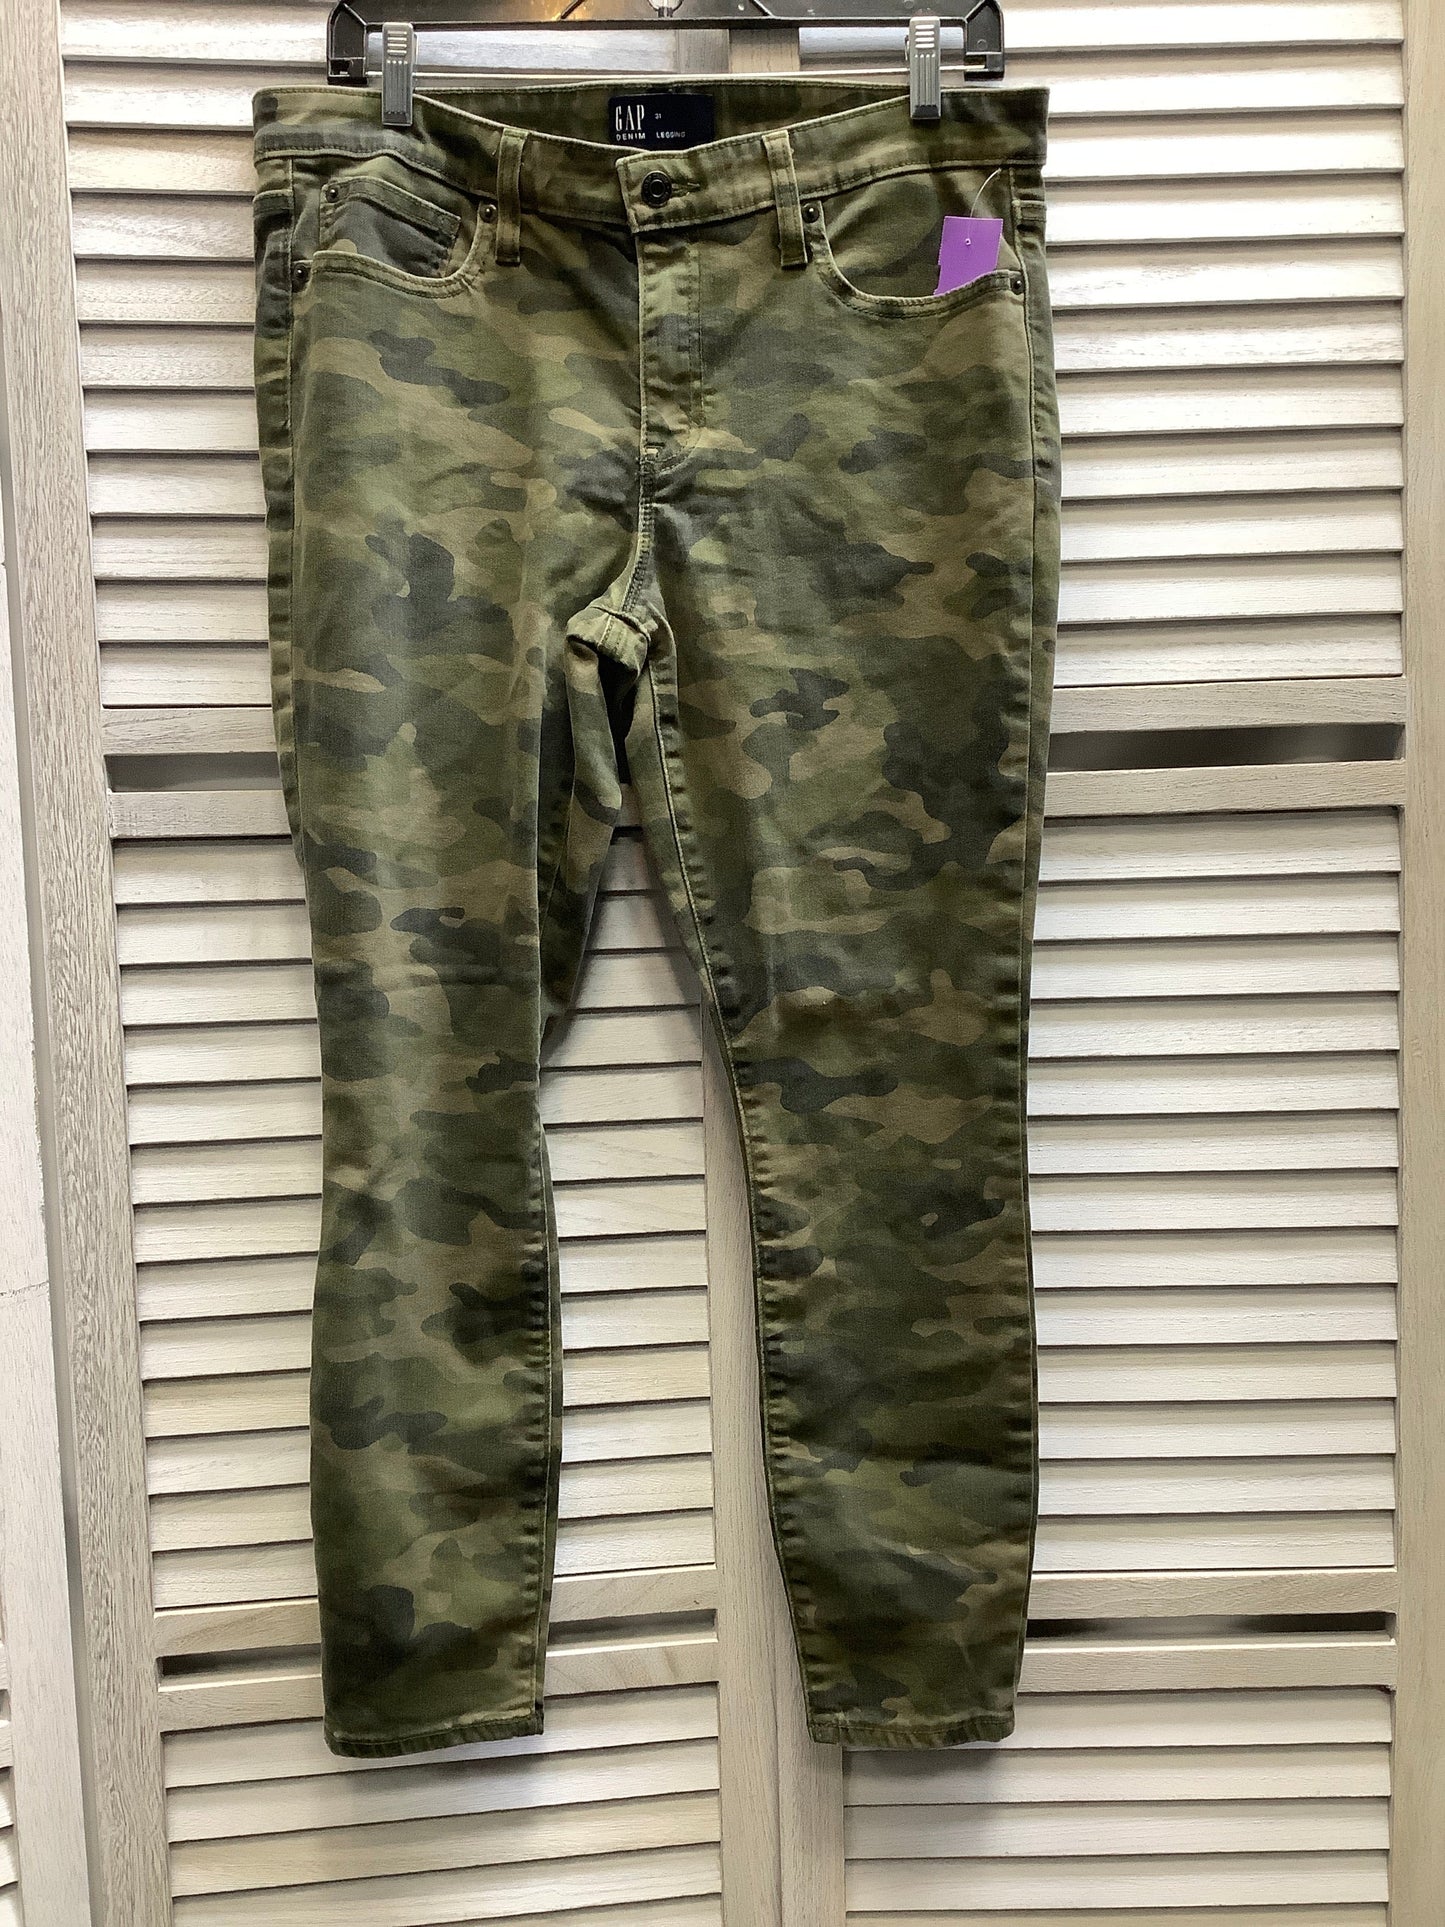 Camouflage Print Jeans Jeggings Gap, Size 8